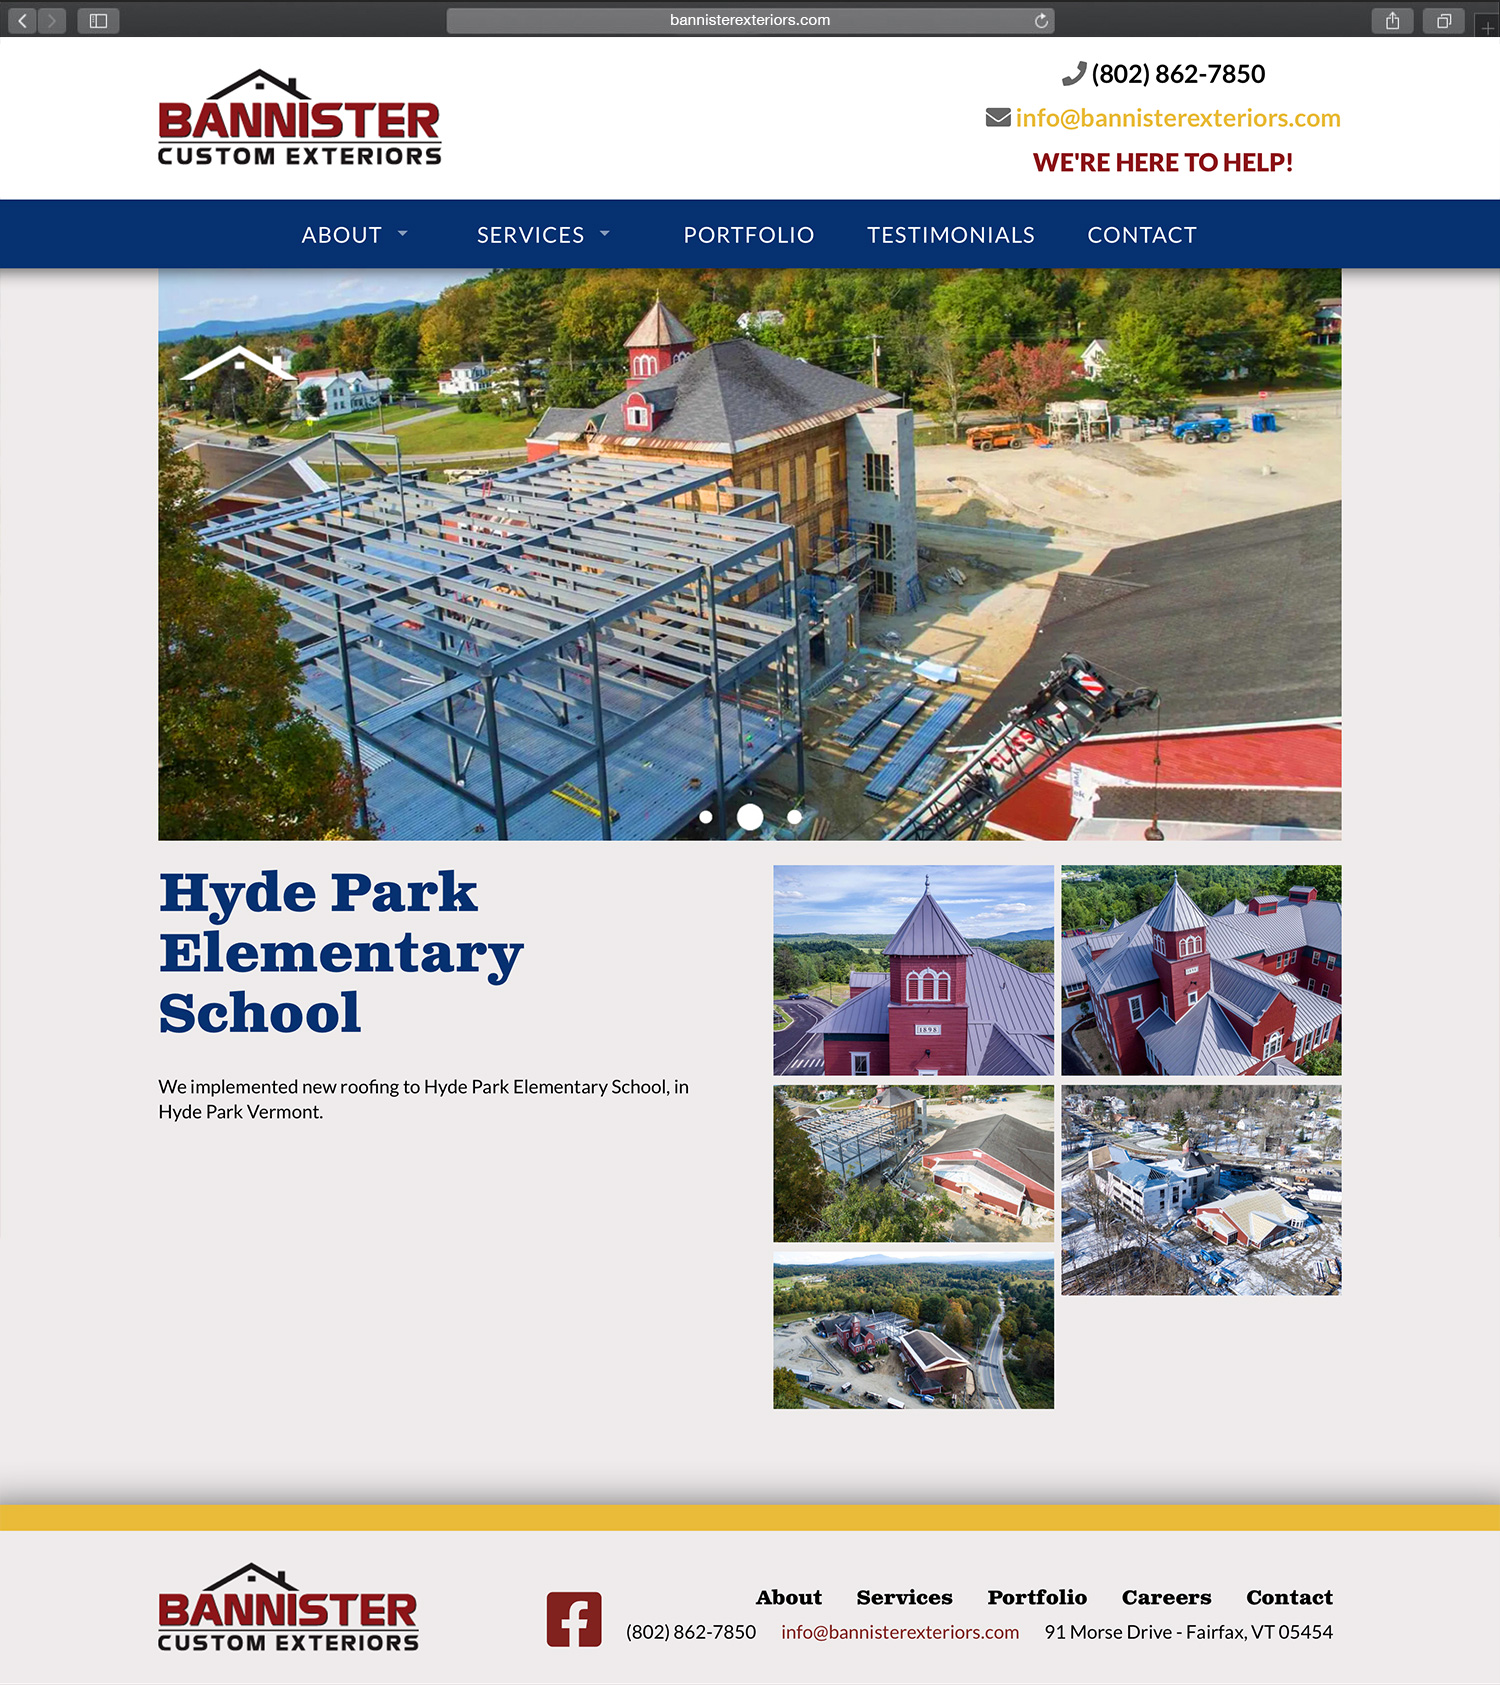 Website design and website development for Bannister Roofing and Custom Exteriors - secondary page view.